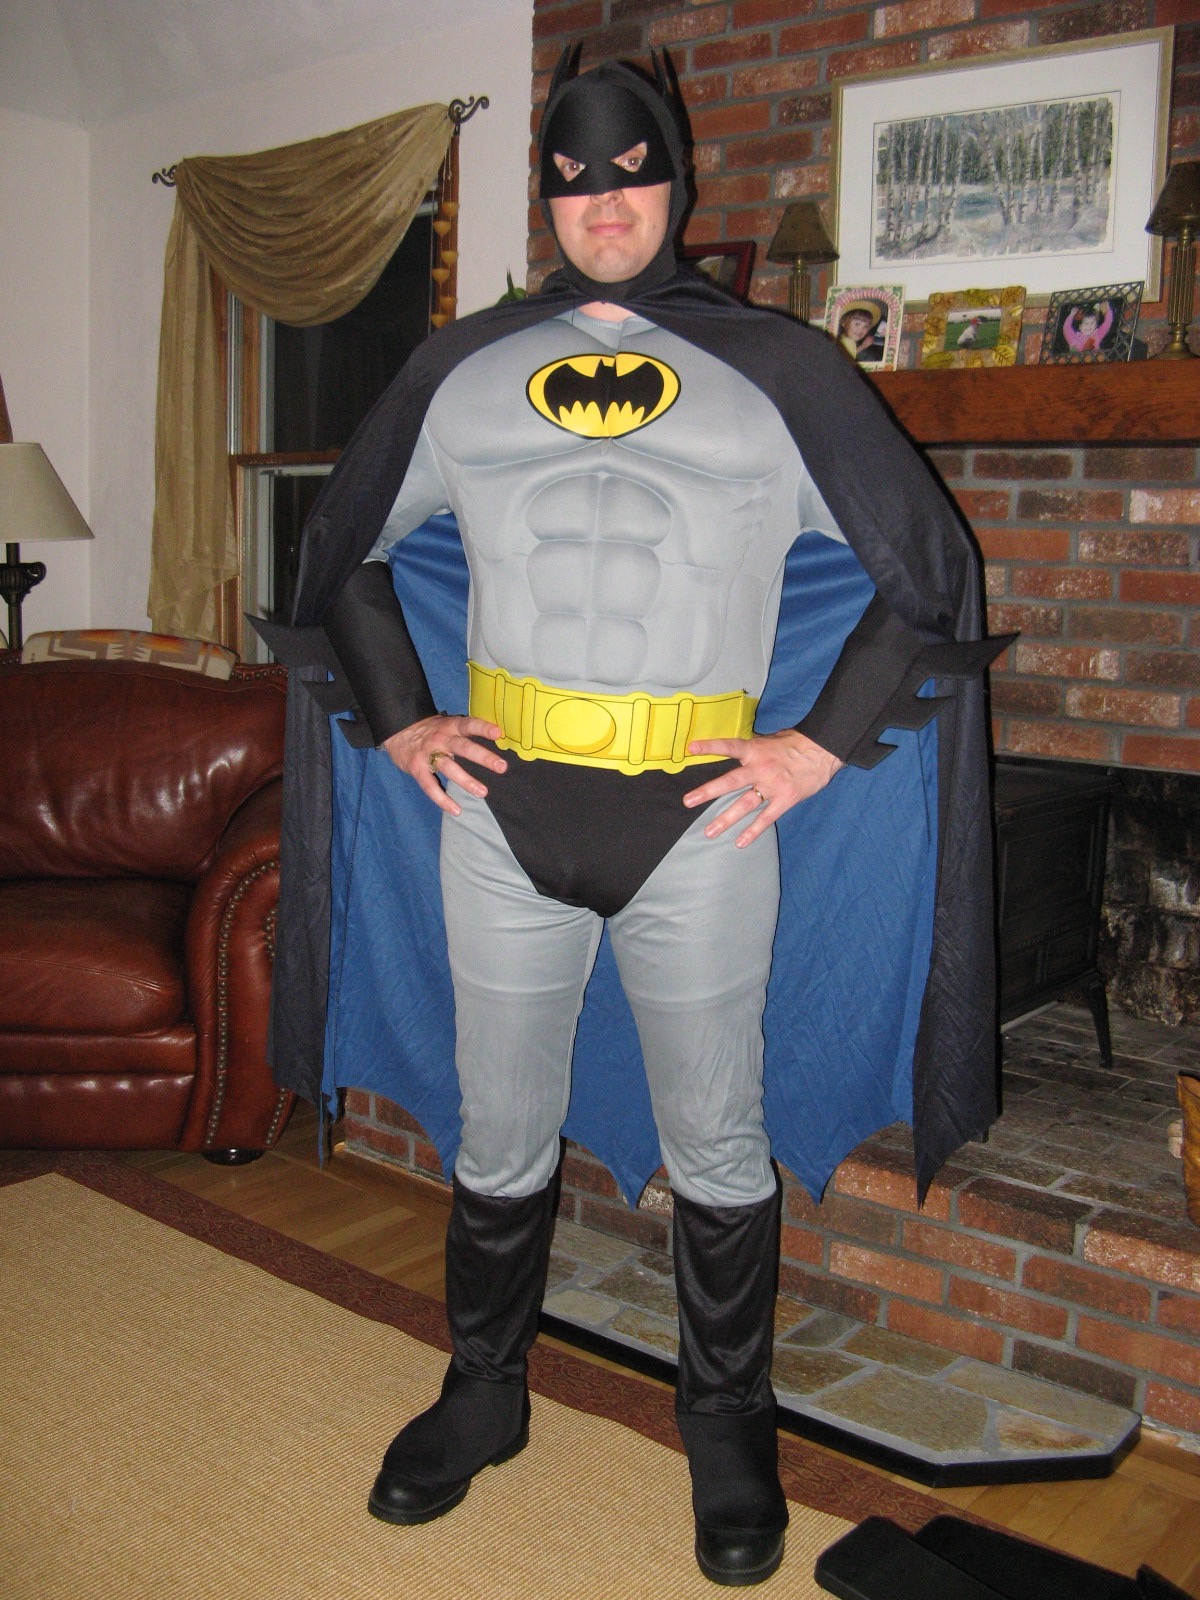 2006-10-31 - Boston patent attorney Erik J. Heels, dressed as Batman, shortly before meeting Boston band founder Tom Scholz, dressed as a rock star (i.e. himself) at a costume party. Holy rock star, Batman!